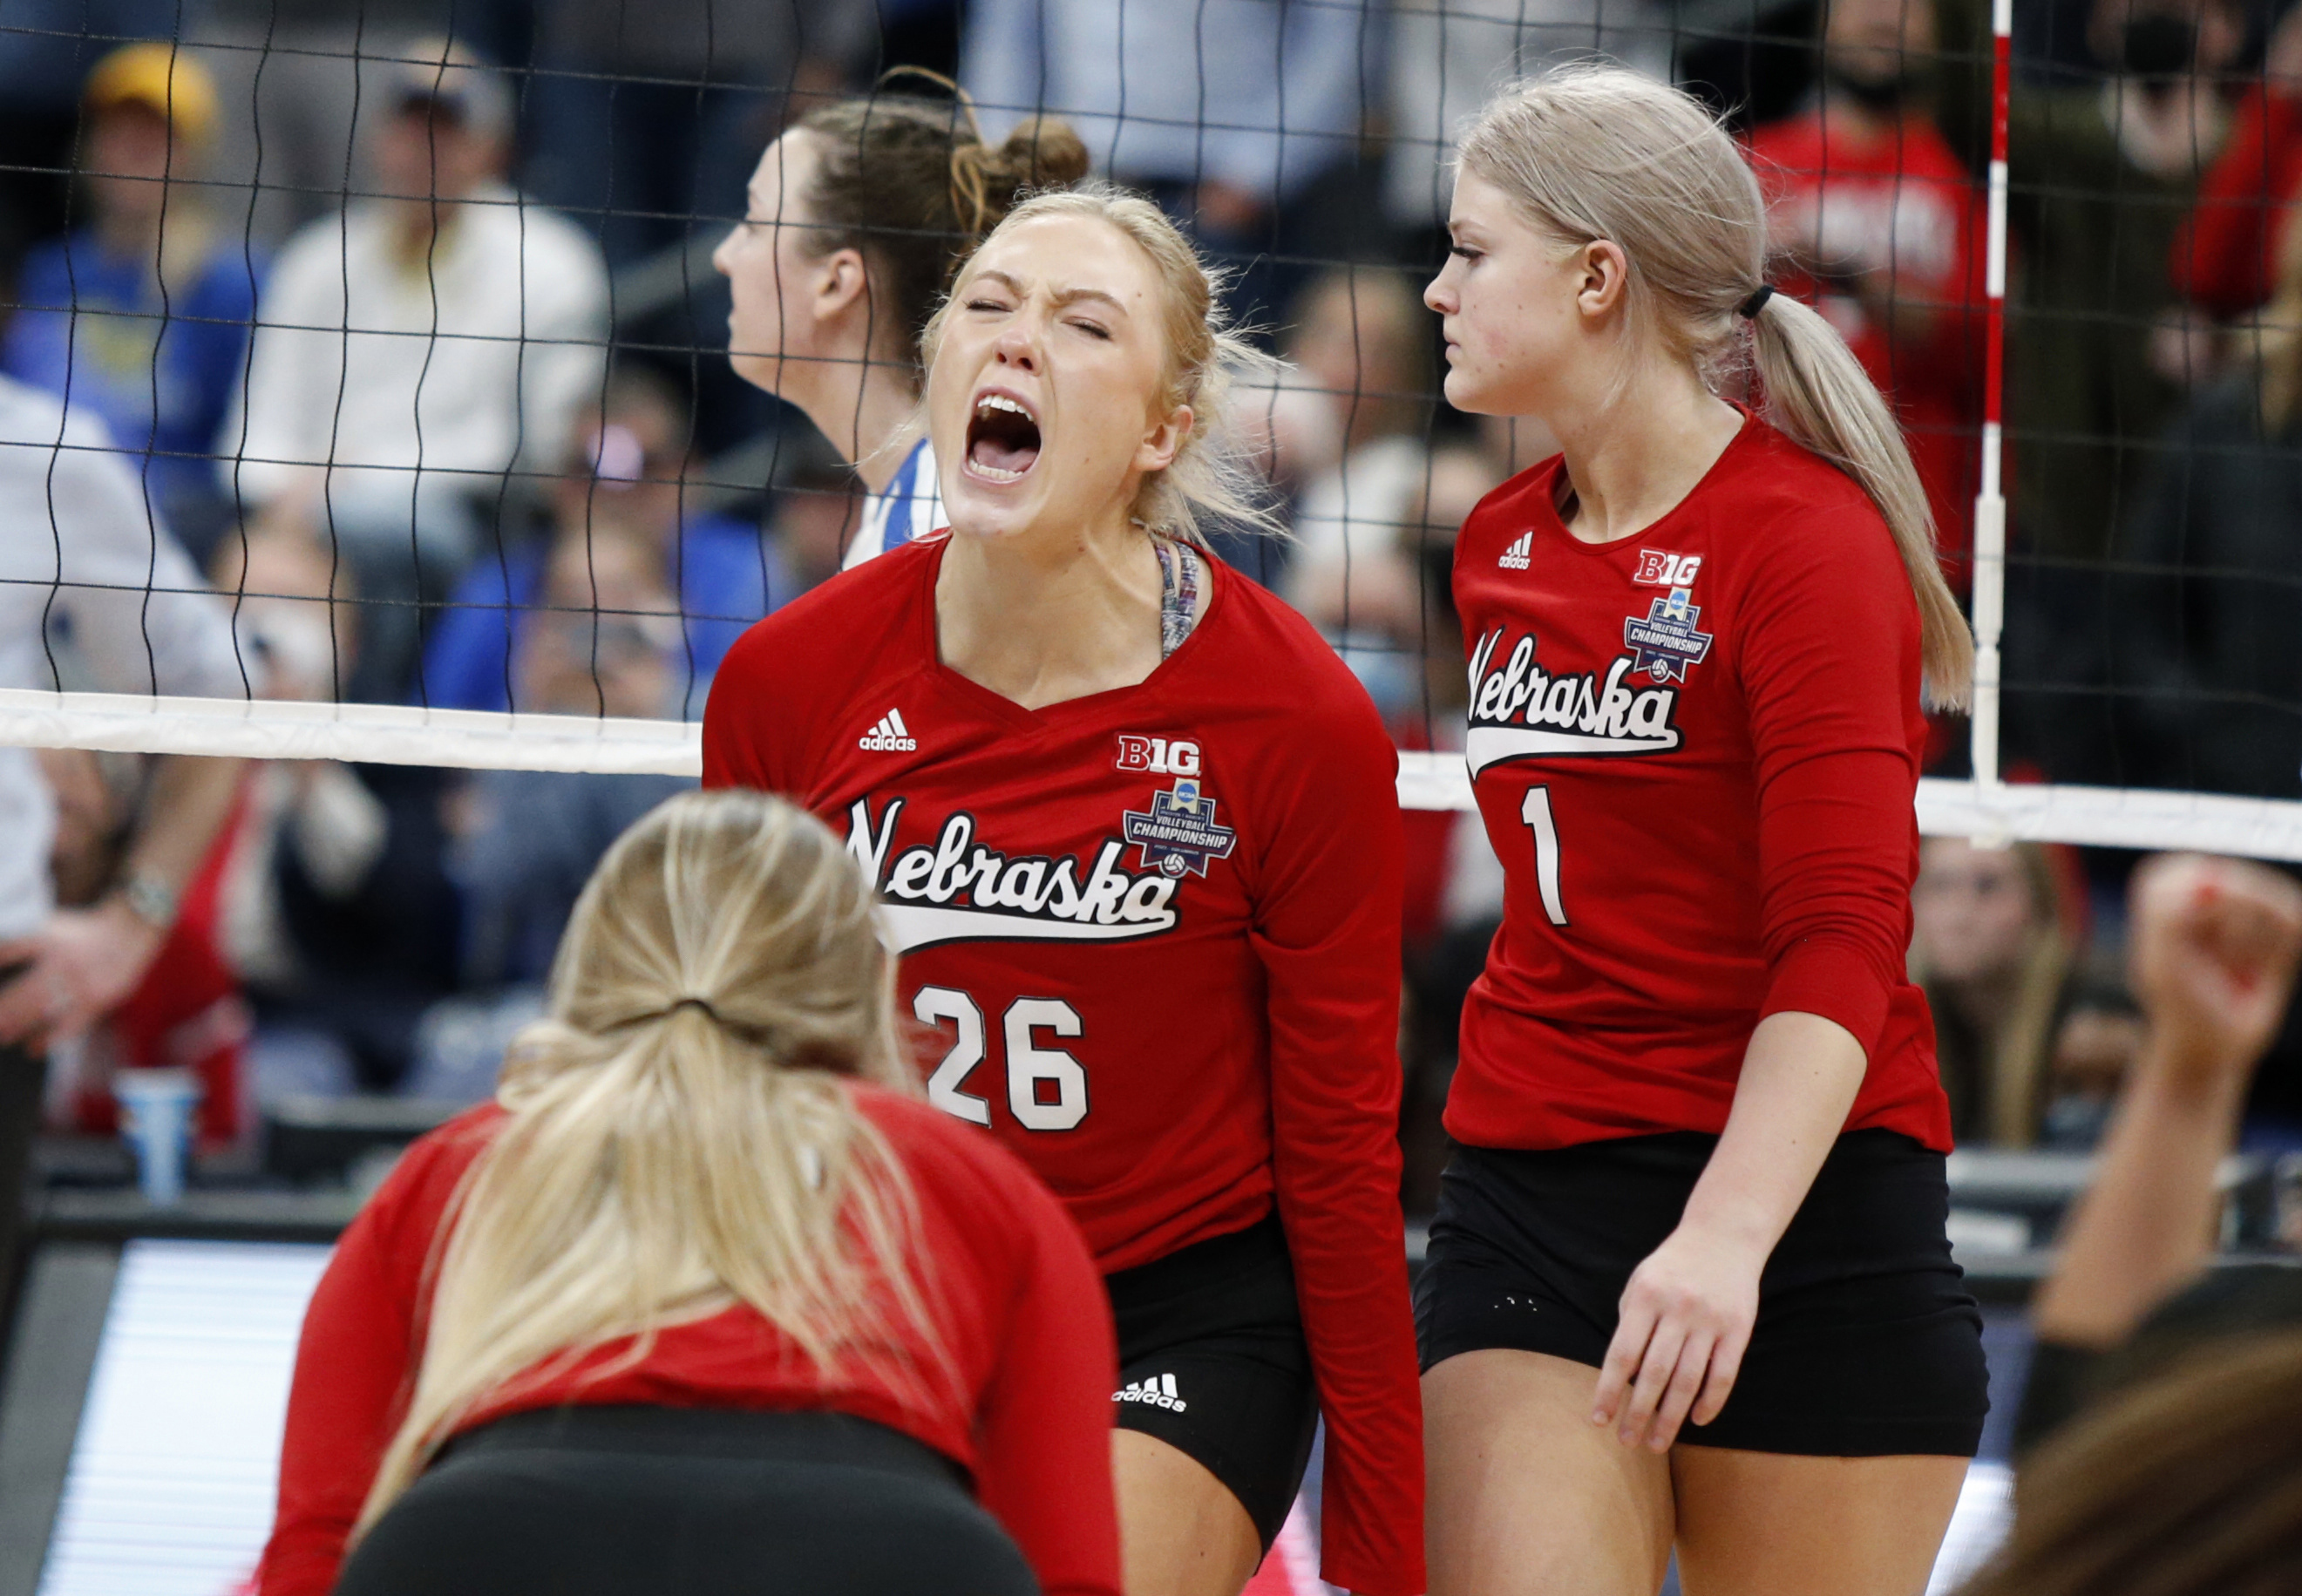 husker volleyball game live streaming free